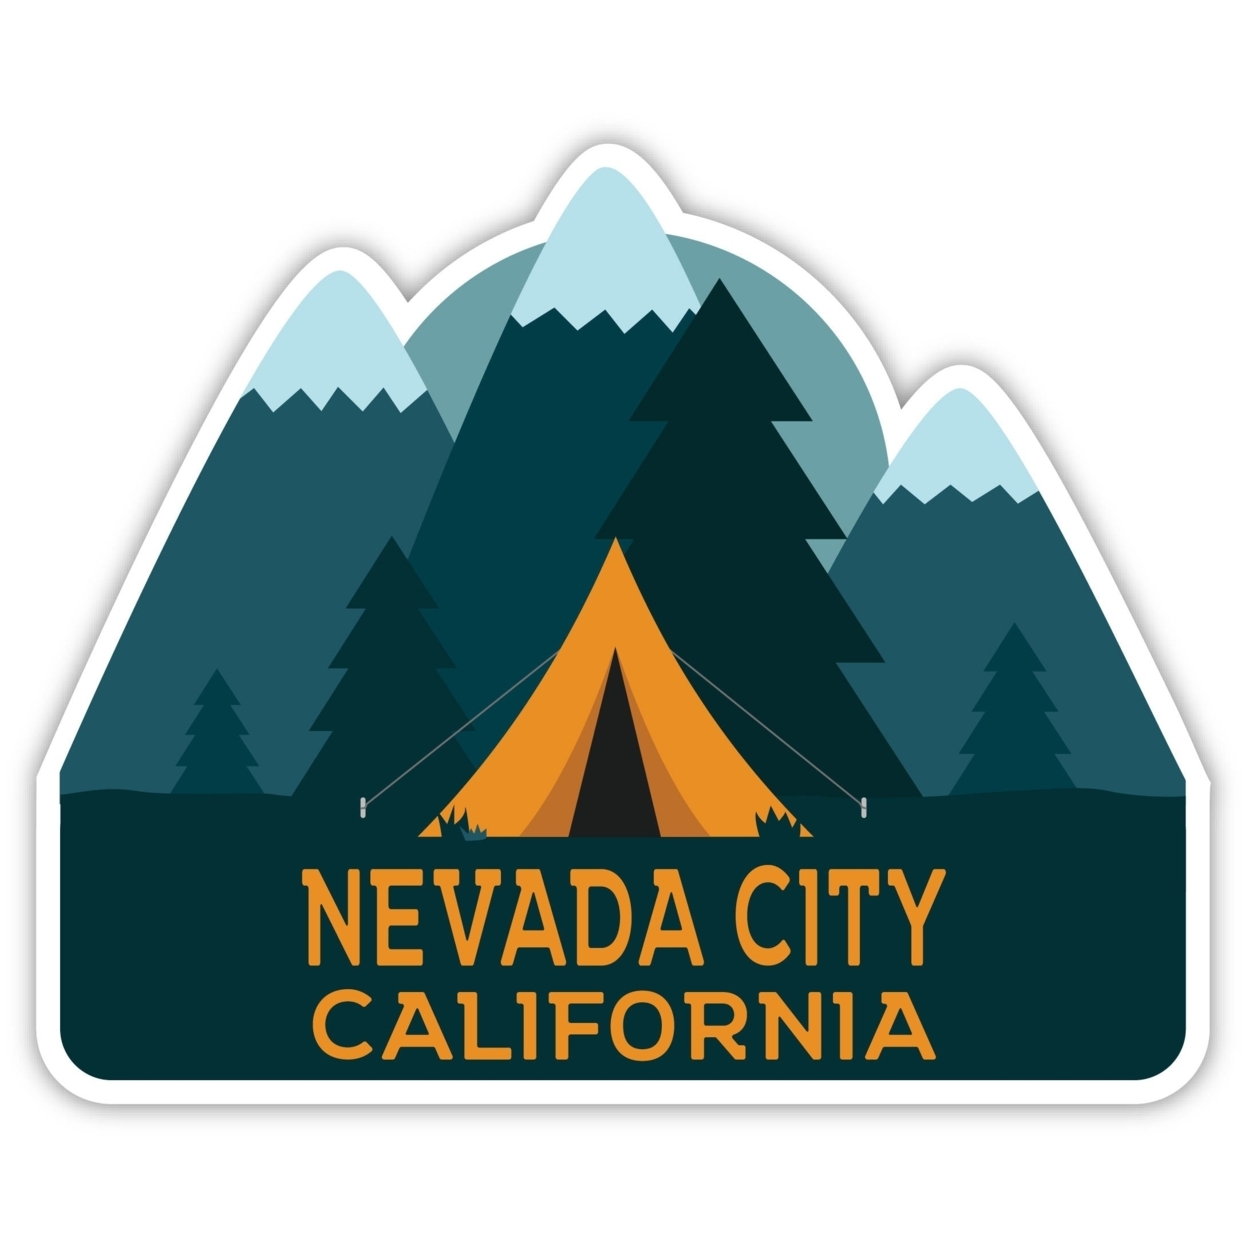 Nevada City California Souvenir Decorative Stickers (Choose Theme And Size) - Single Unit, 2-Inch, Great Outdoors